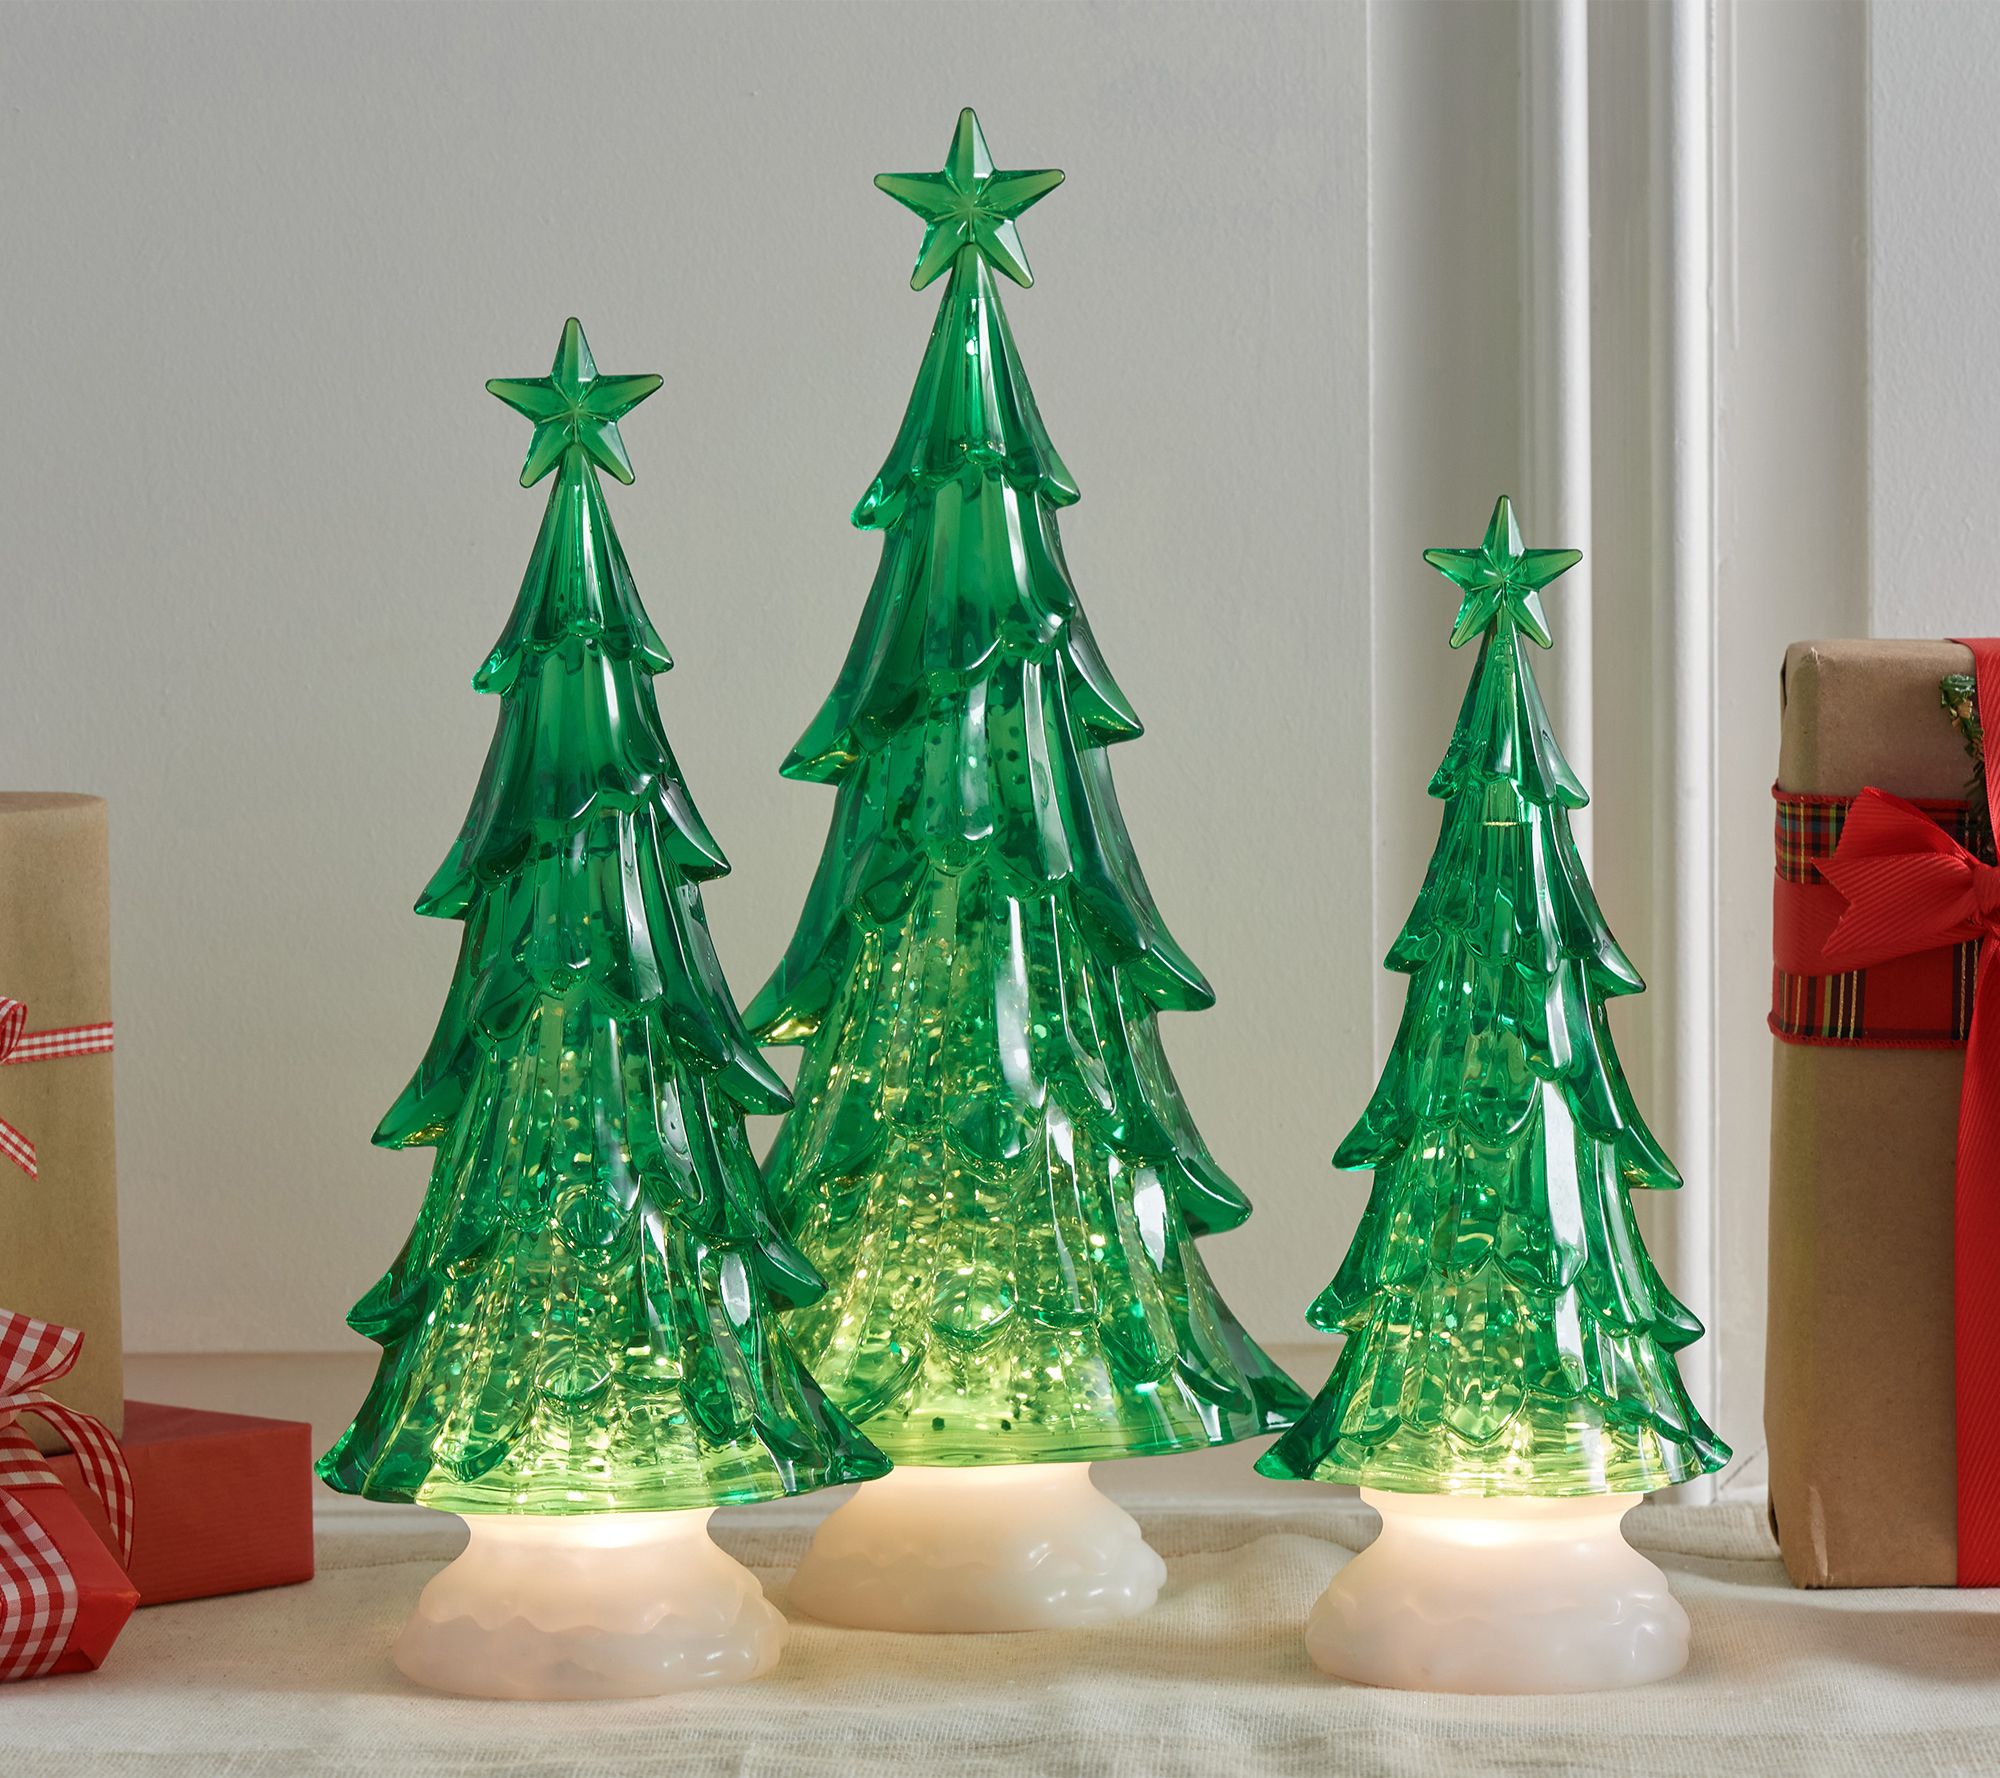 Imperfect Details about   14" Illuminated Shatterproof Glitter Christmas Tree Valerie QVC 